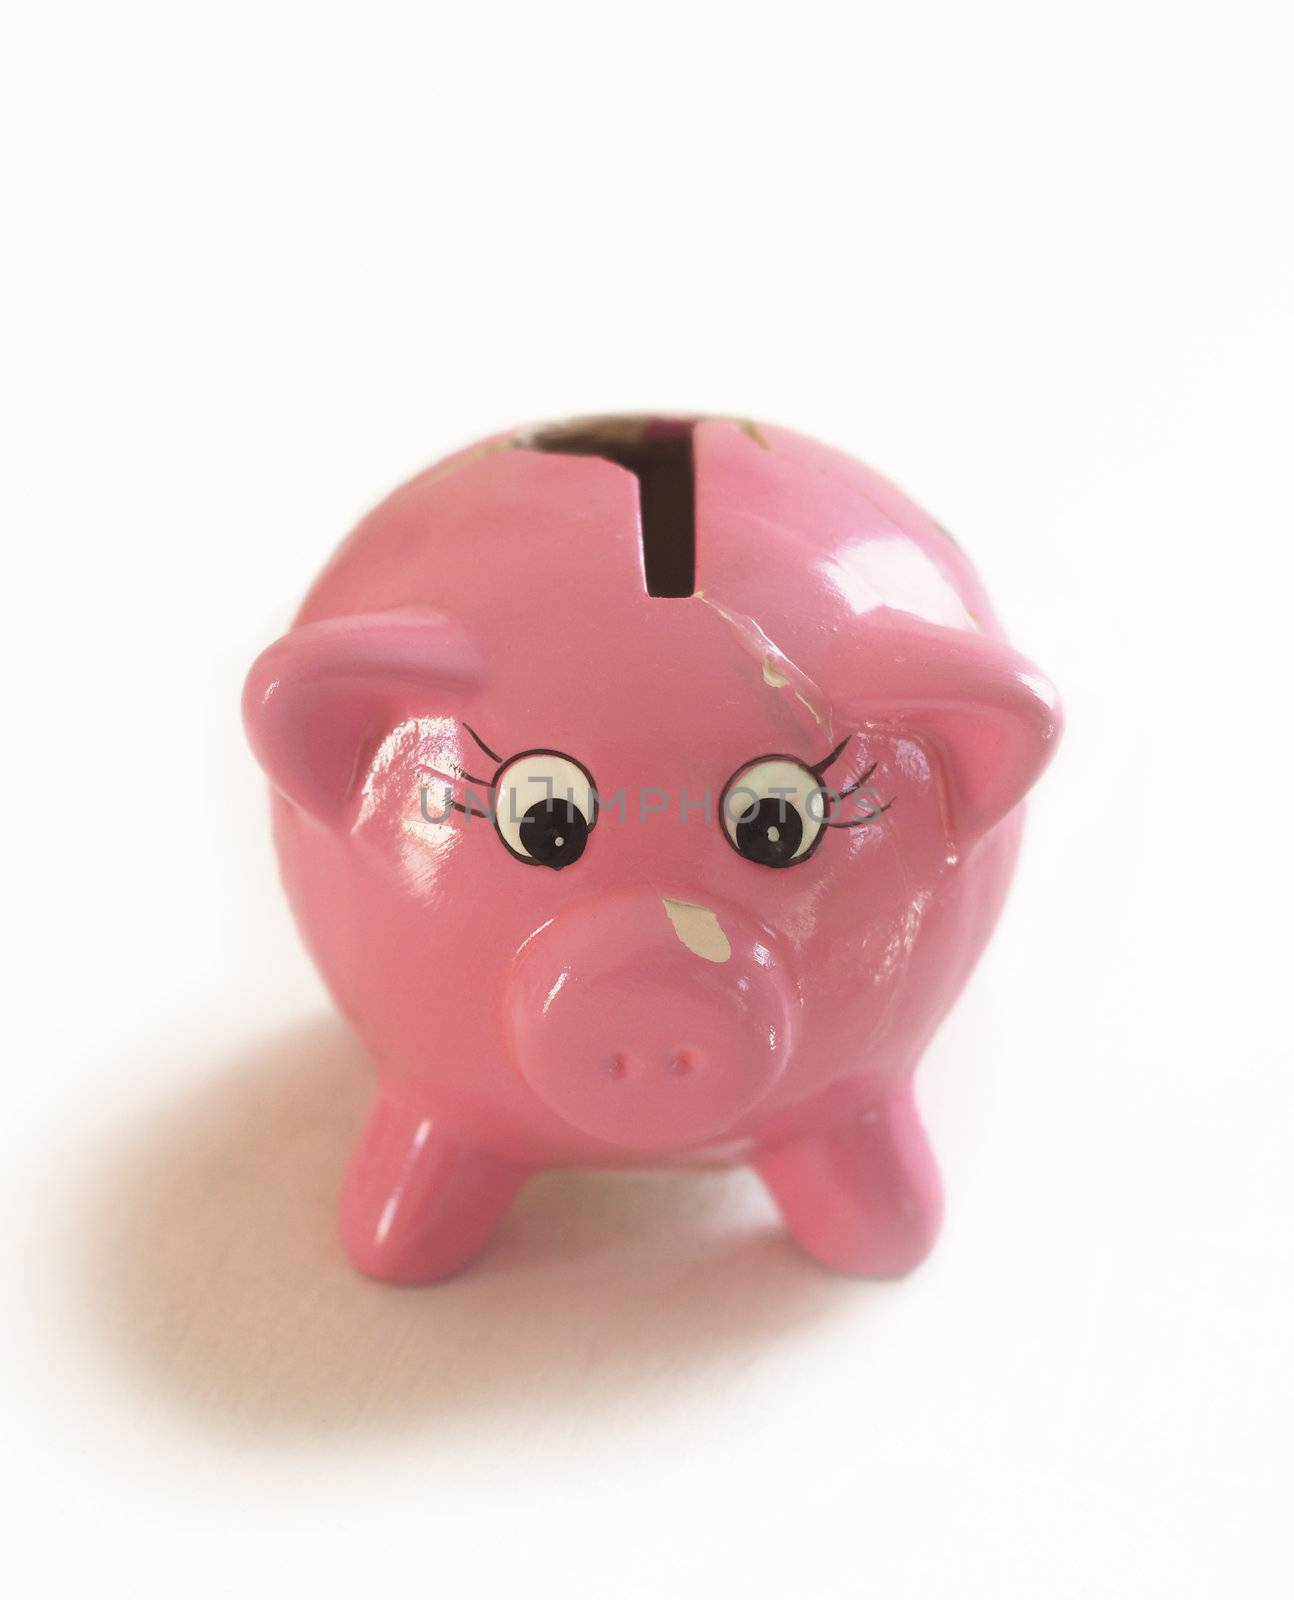 A surprised looking little piggy bank with chips and cracks. Isolated on white